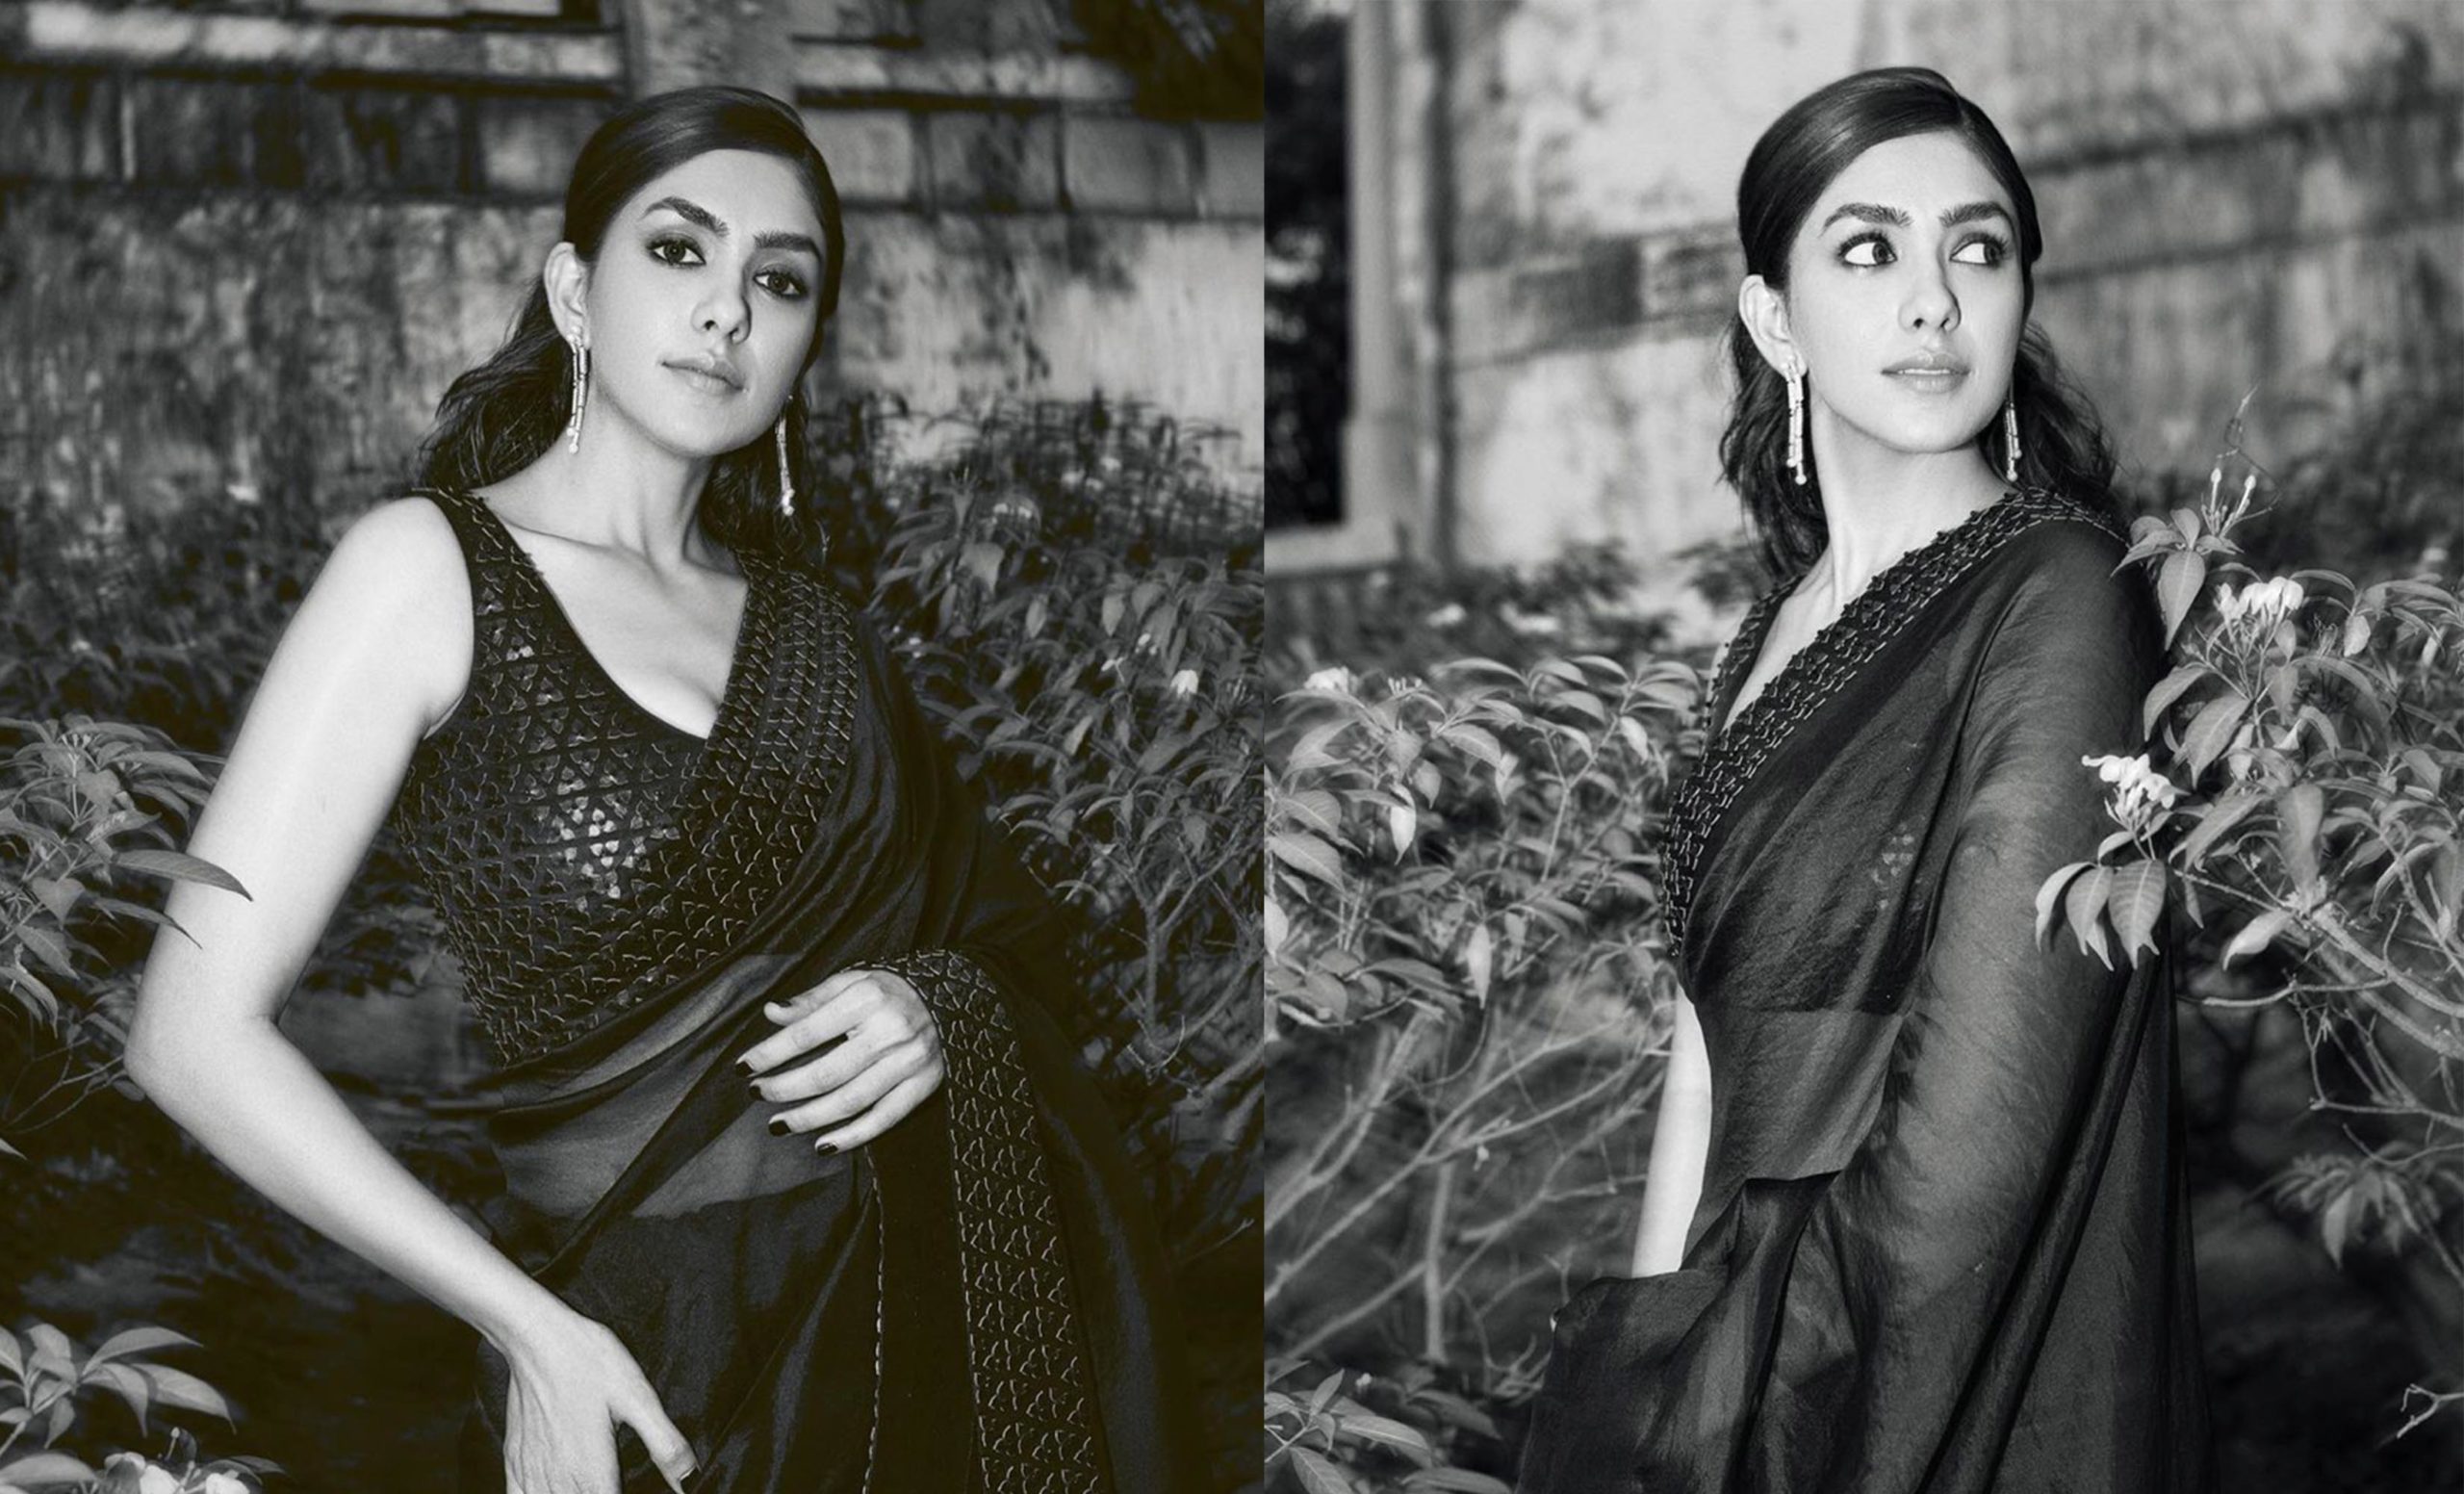 Mrunal Thakur Channels Classic Charm Through This Silk Saree For ‘Jersey’ Promotions. Quite A Dhamakedar Look